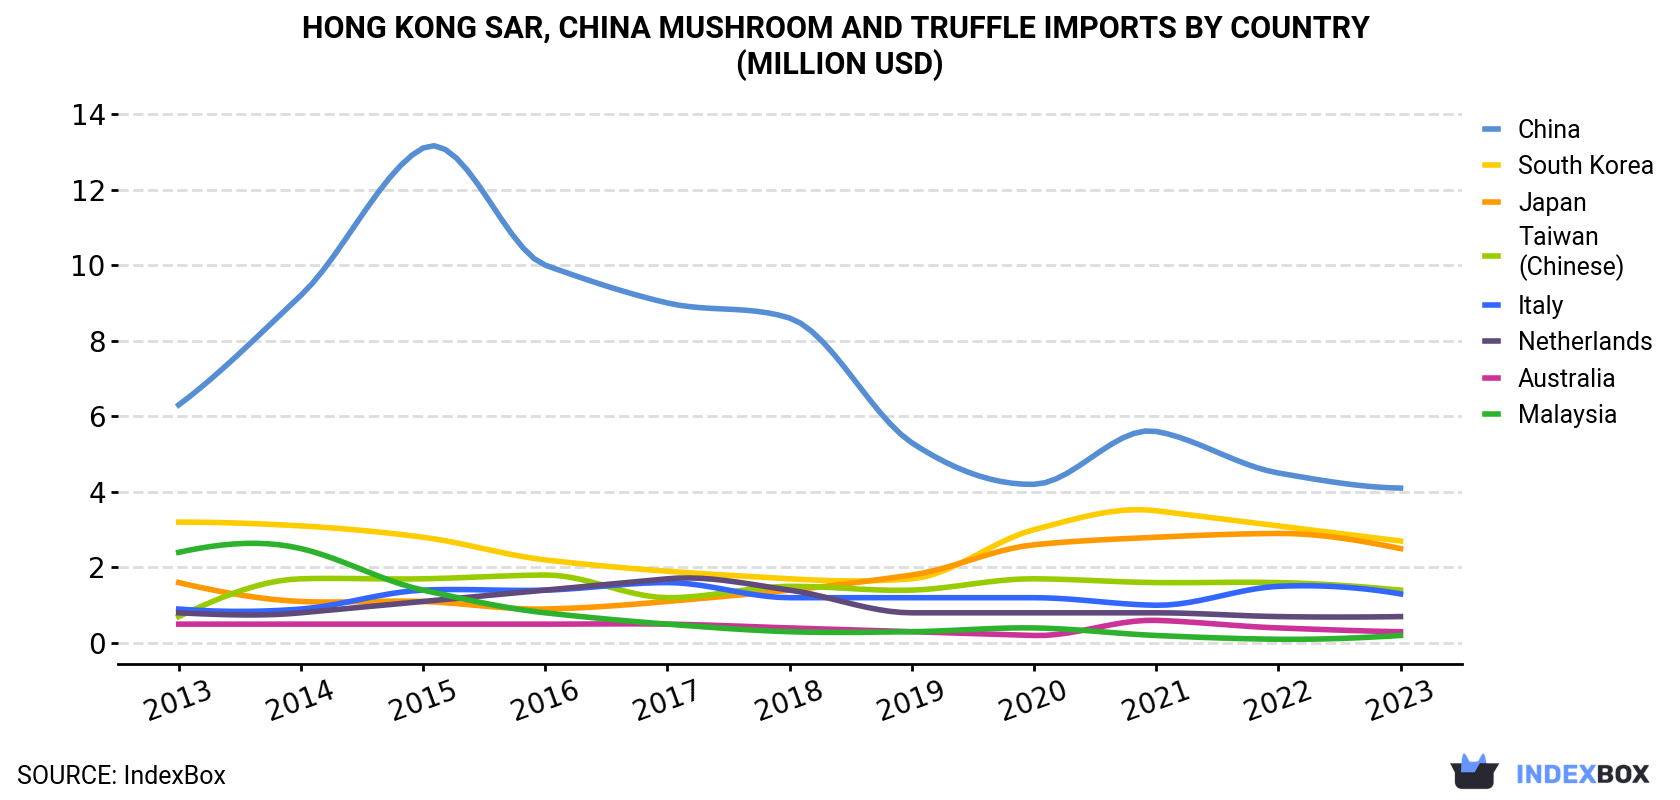 Hong Kong Mushroom And Truffle Imports By Country (Million USD)